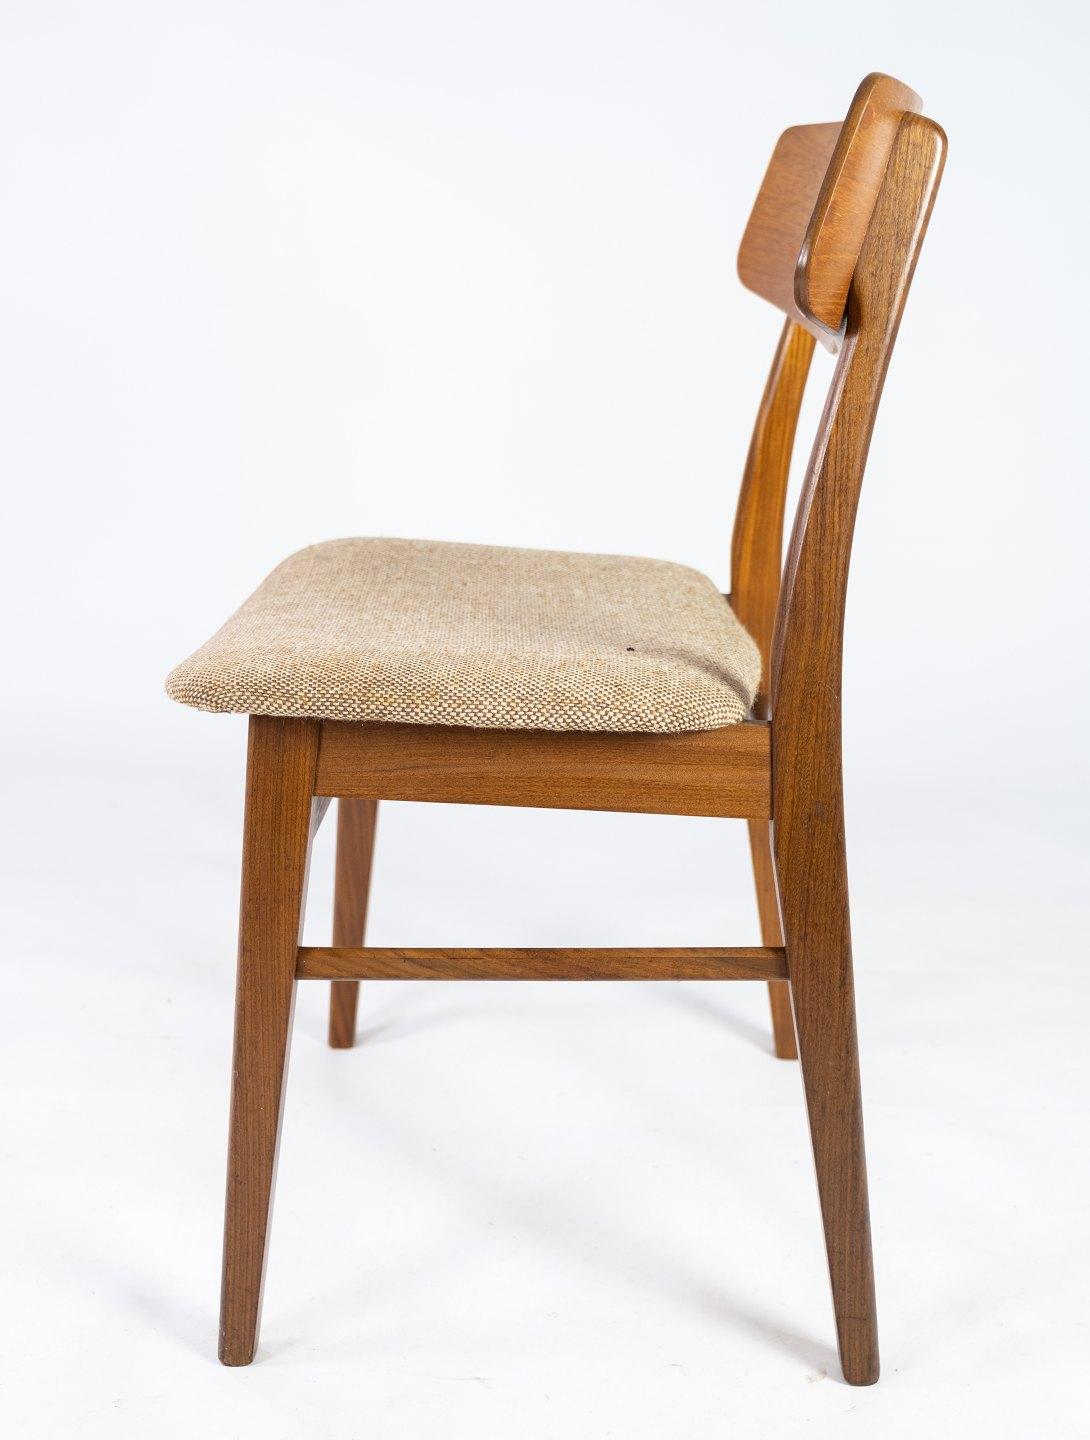 Dining room chair in teak and light fabric of Danish design from the 1960s. The chair is in great vintage condition.
  